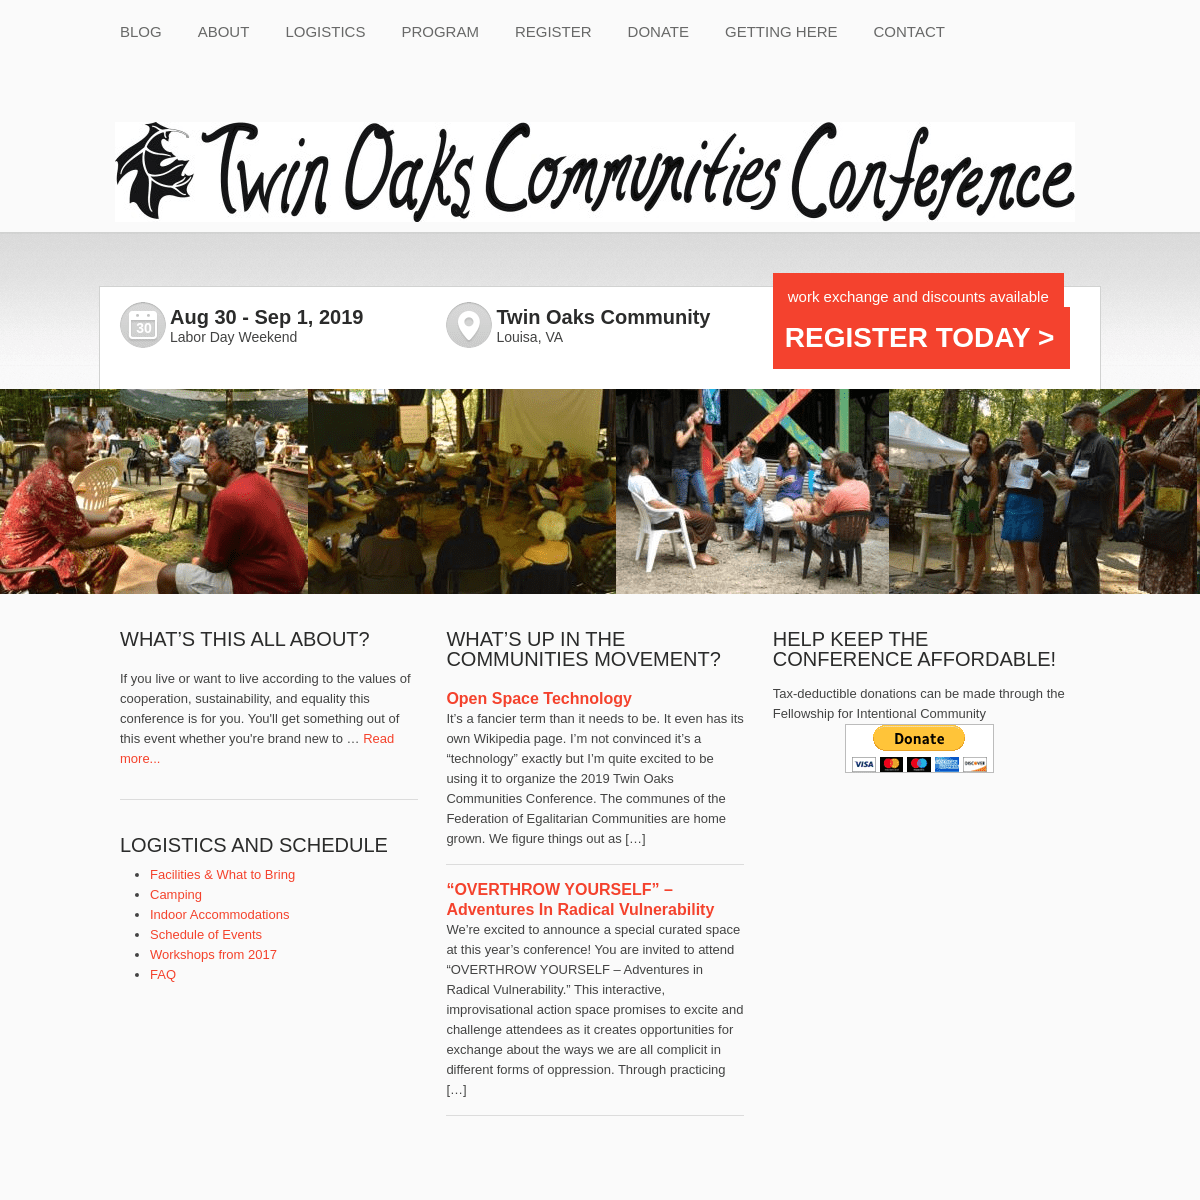 A complete backup of communitiesconference.org